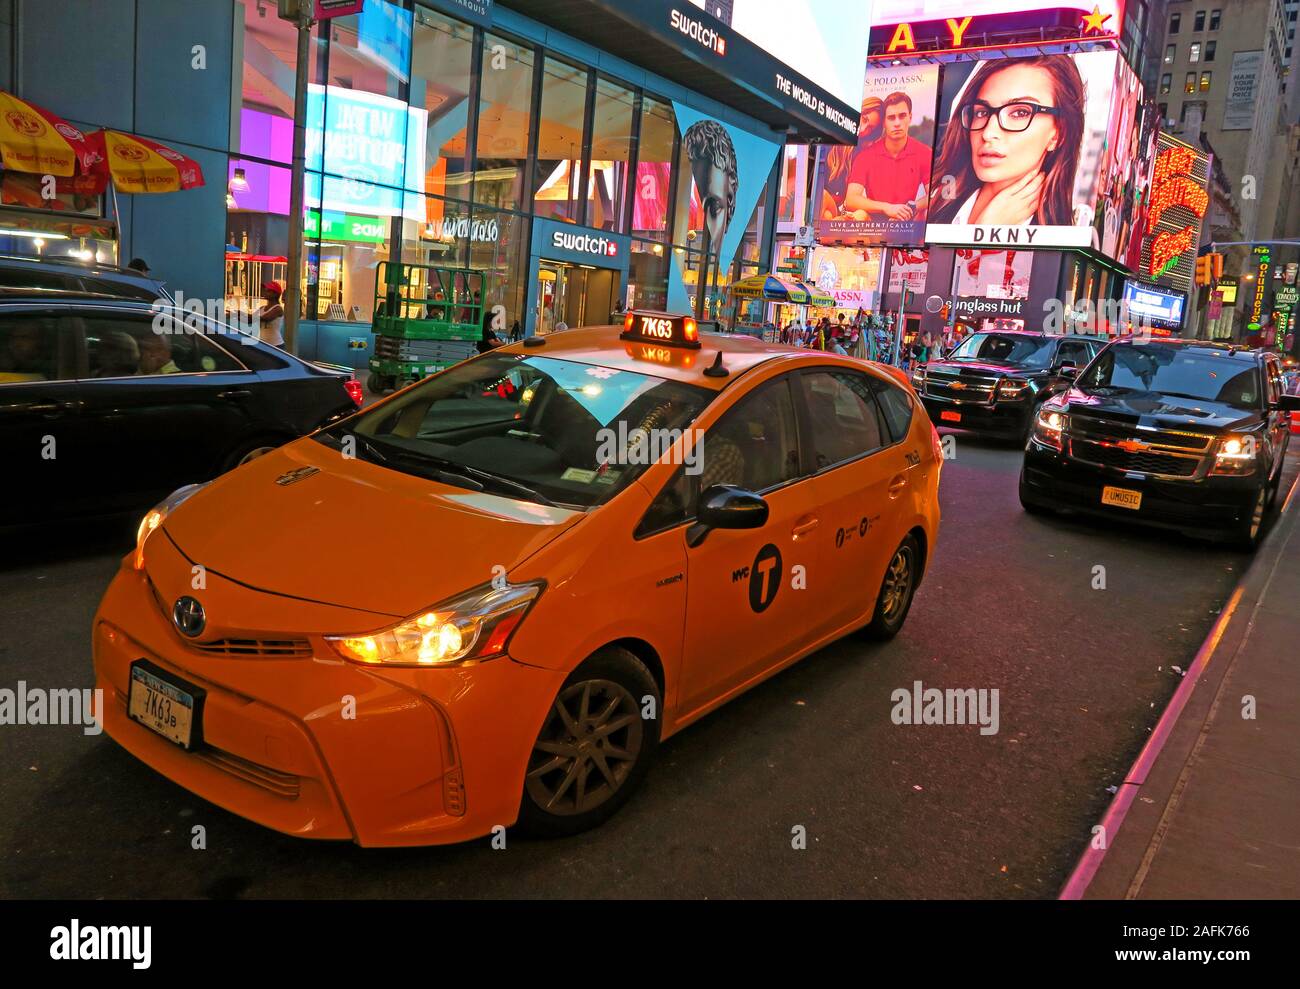 Yellow Cab 7K63 la nuit , Times Square,Manhattan, New York City, NY, USA Banque D'Images